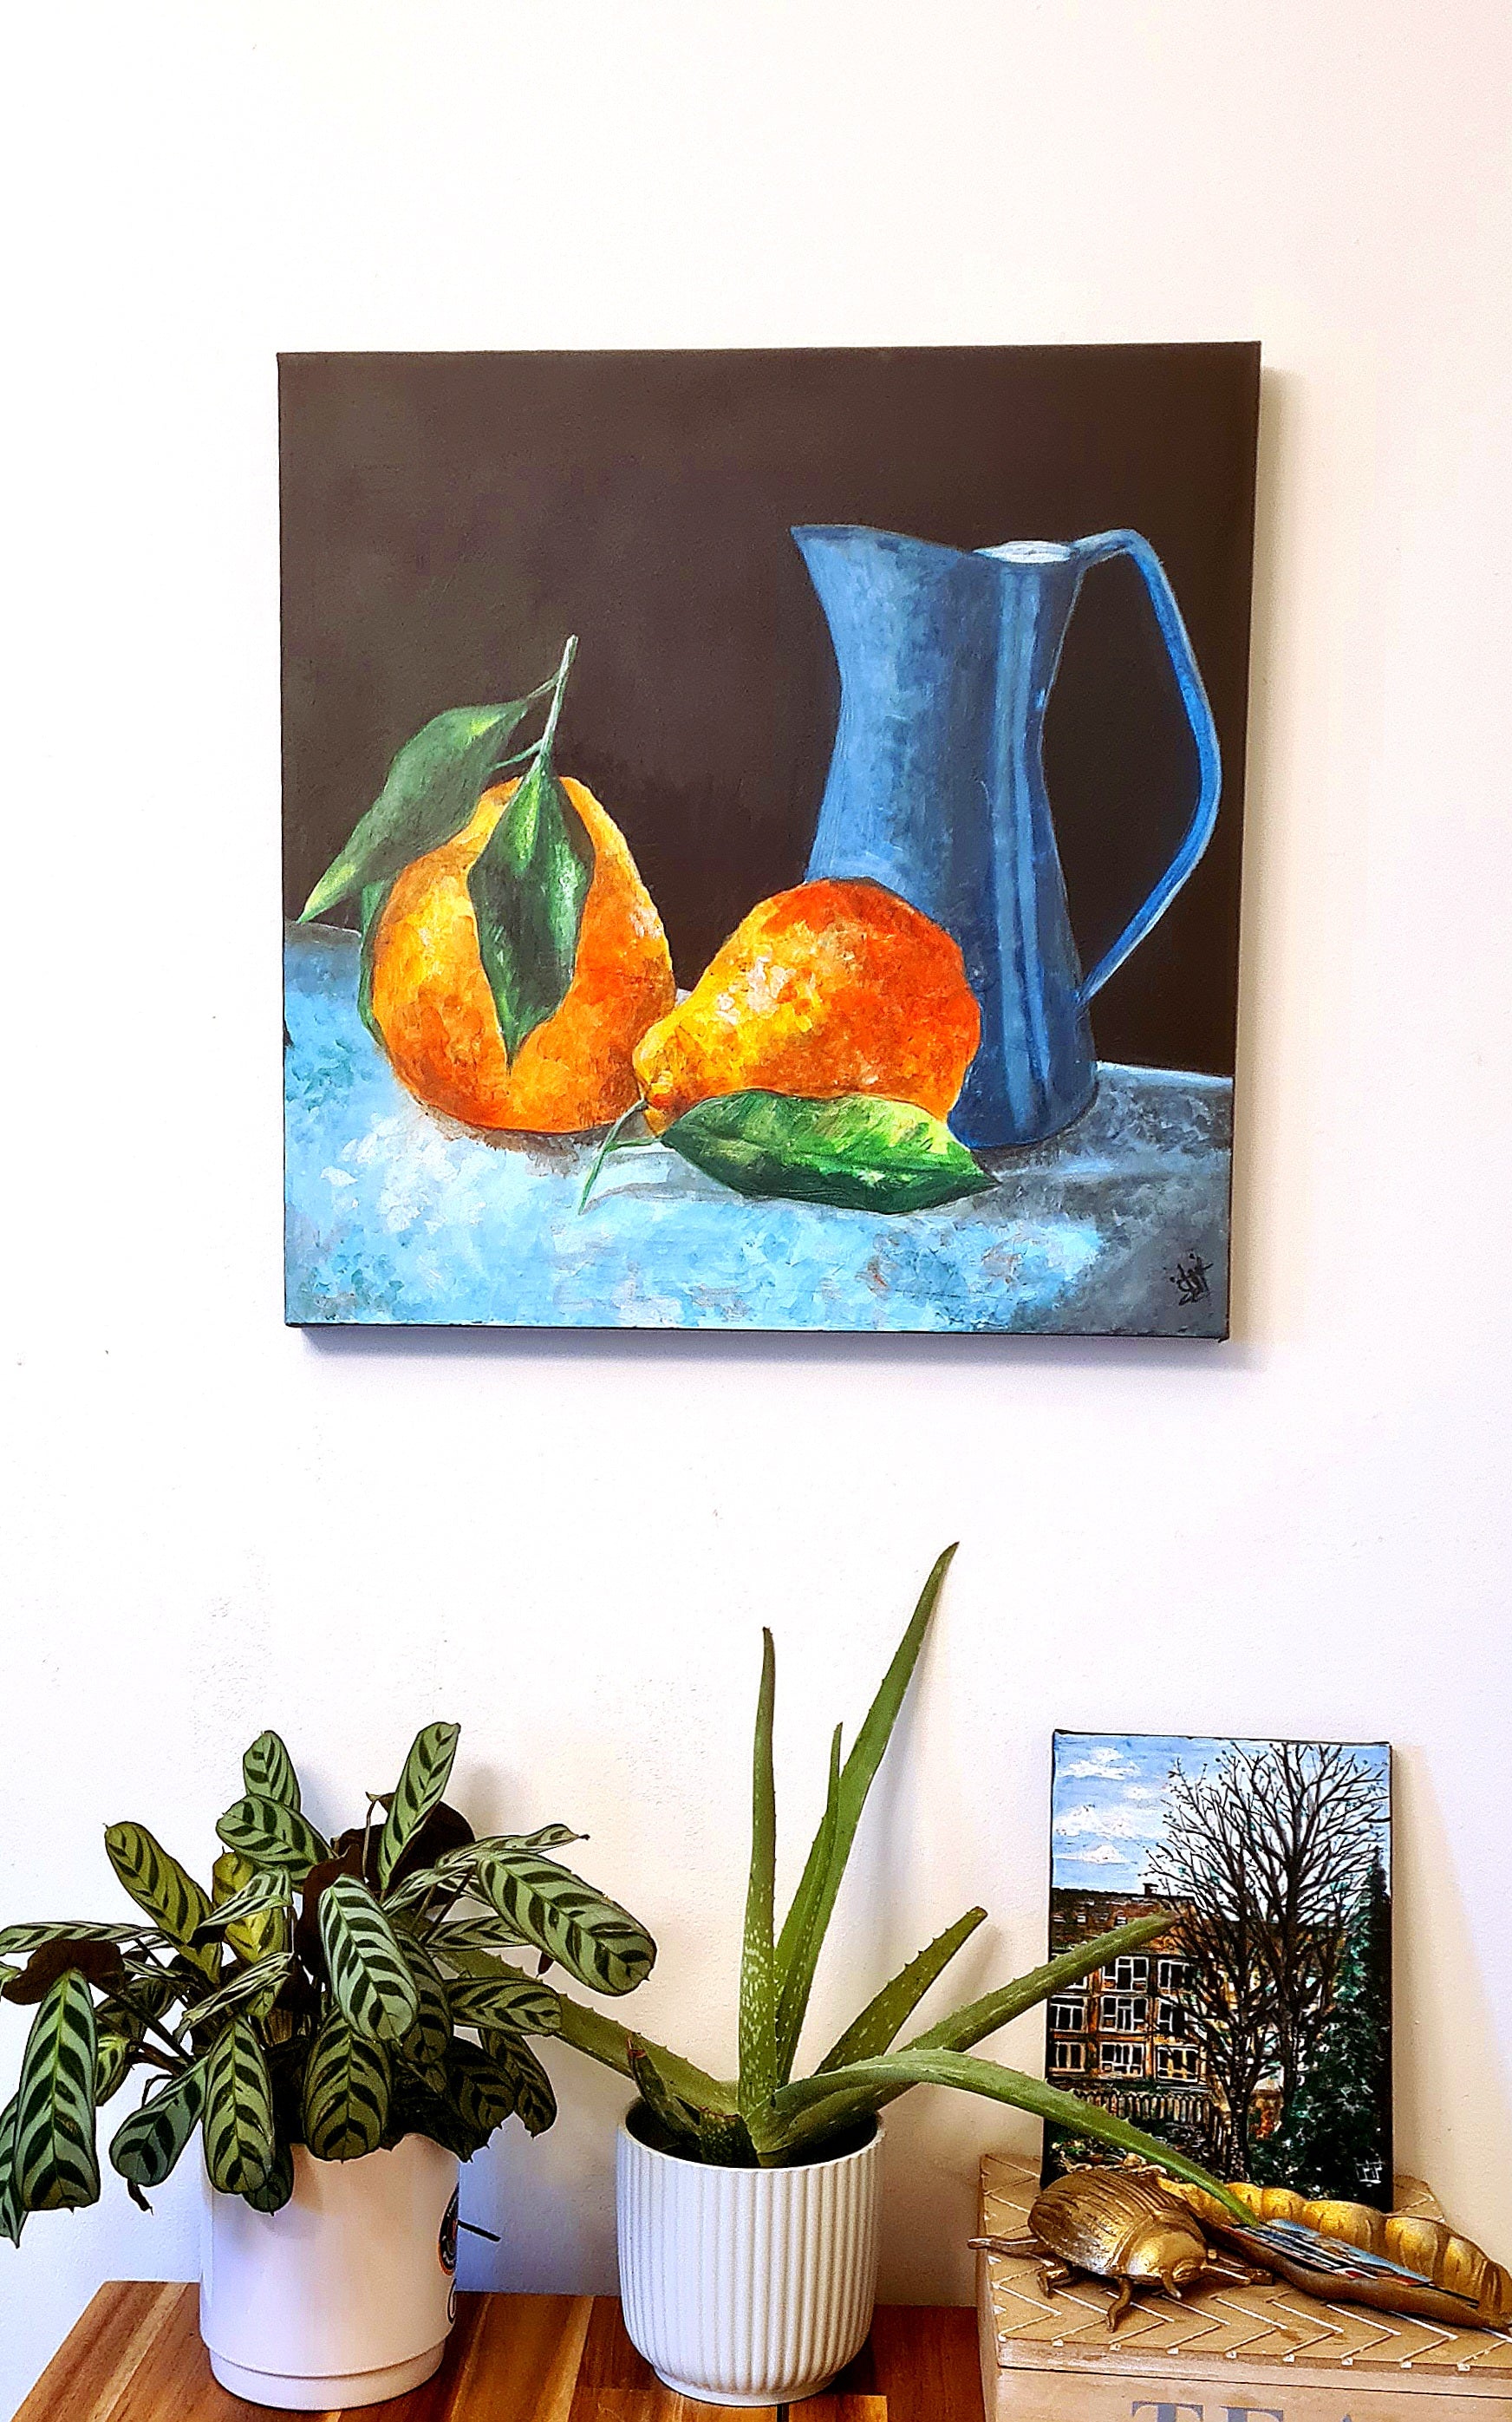  A painting of pears and a blue pitcher hanging on a wall next to potted plants on a table. The painting is done in a realistic style, with attention to detail. The pears are a vibrant orange color. The pitcher is a blue color, and the table is a wooden table. The potted plants are green. The painting is hung on a white wall